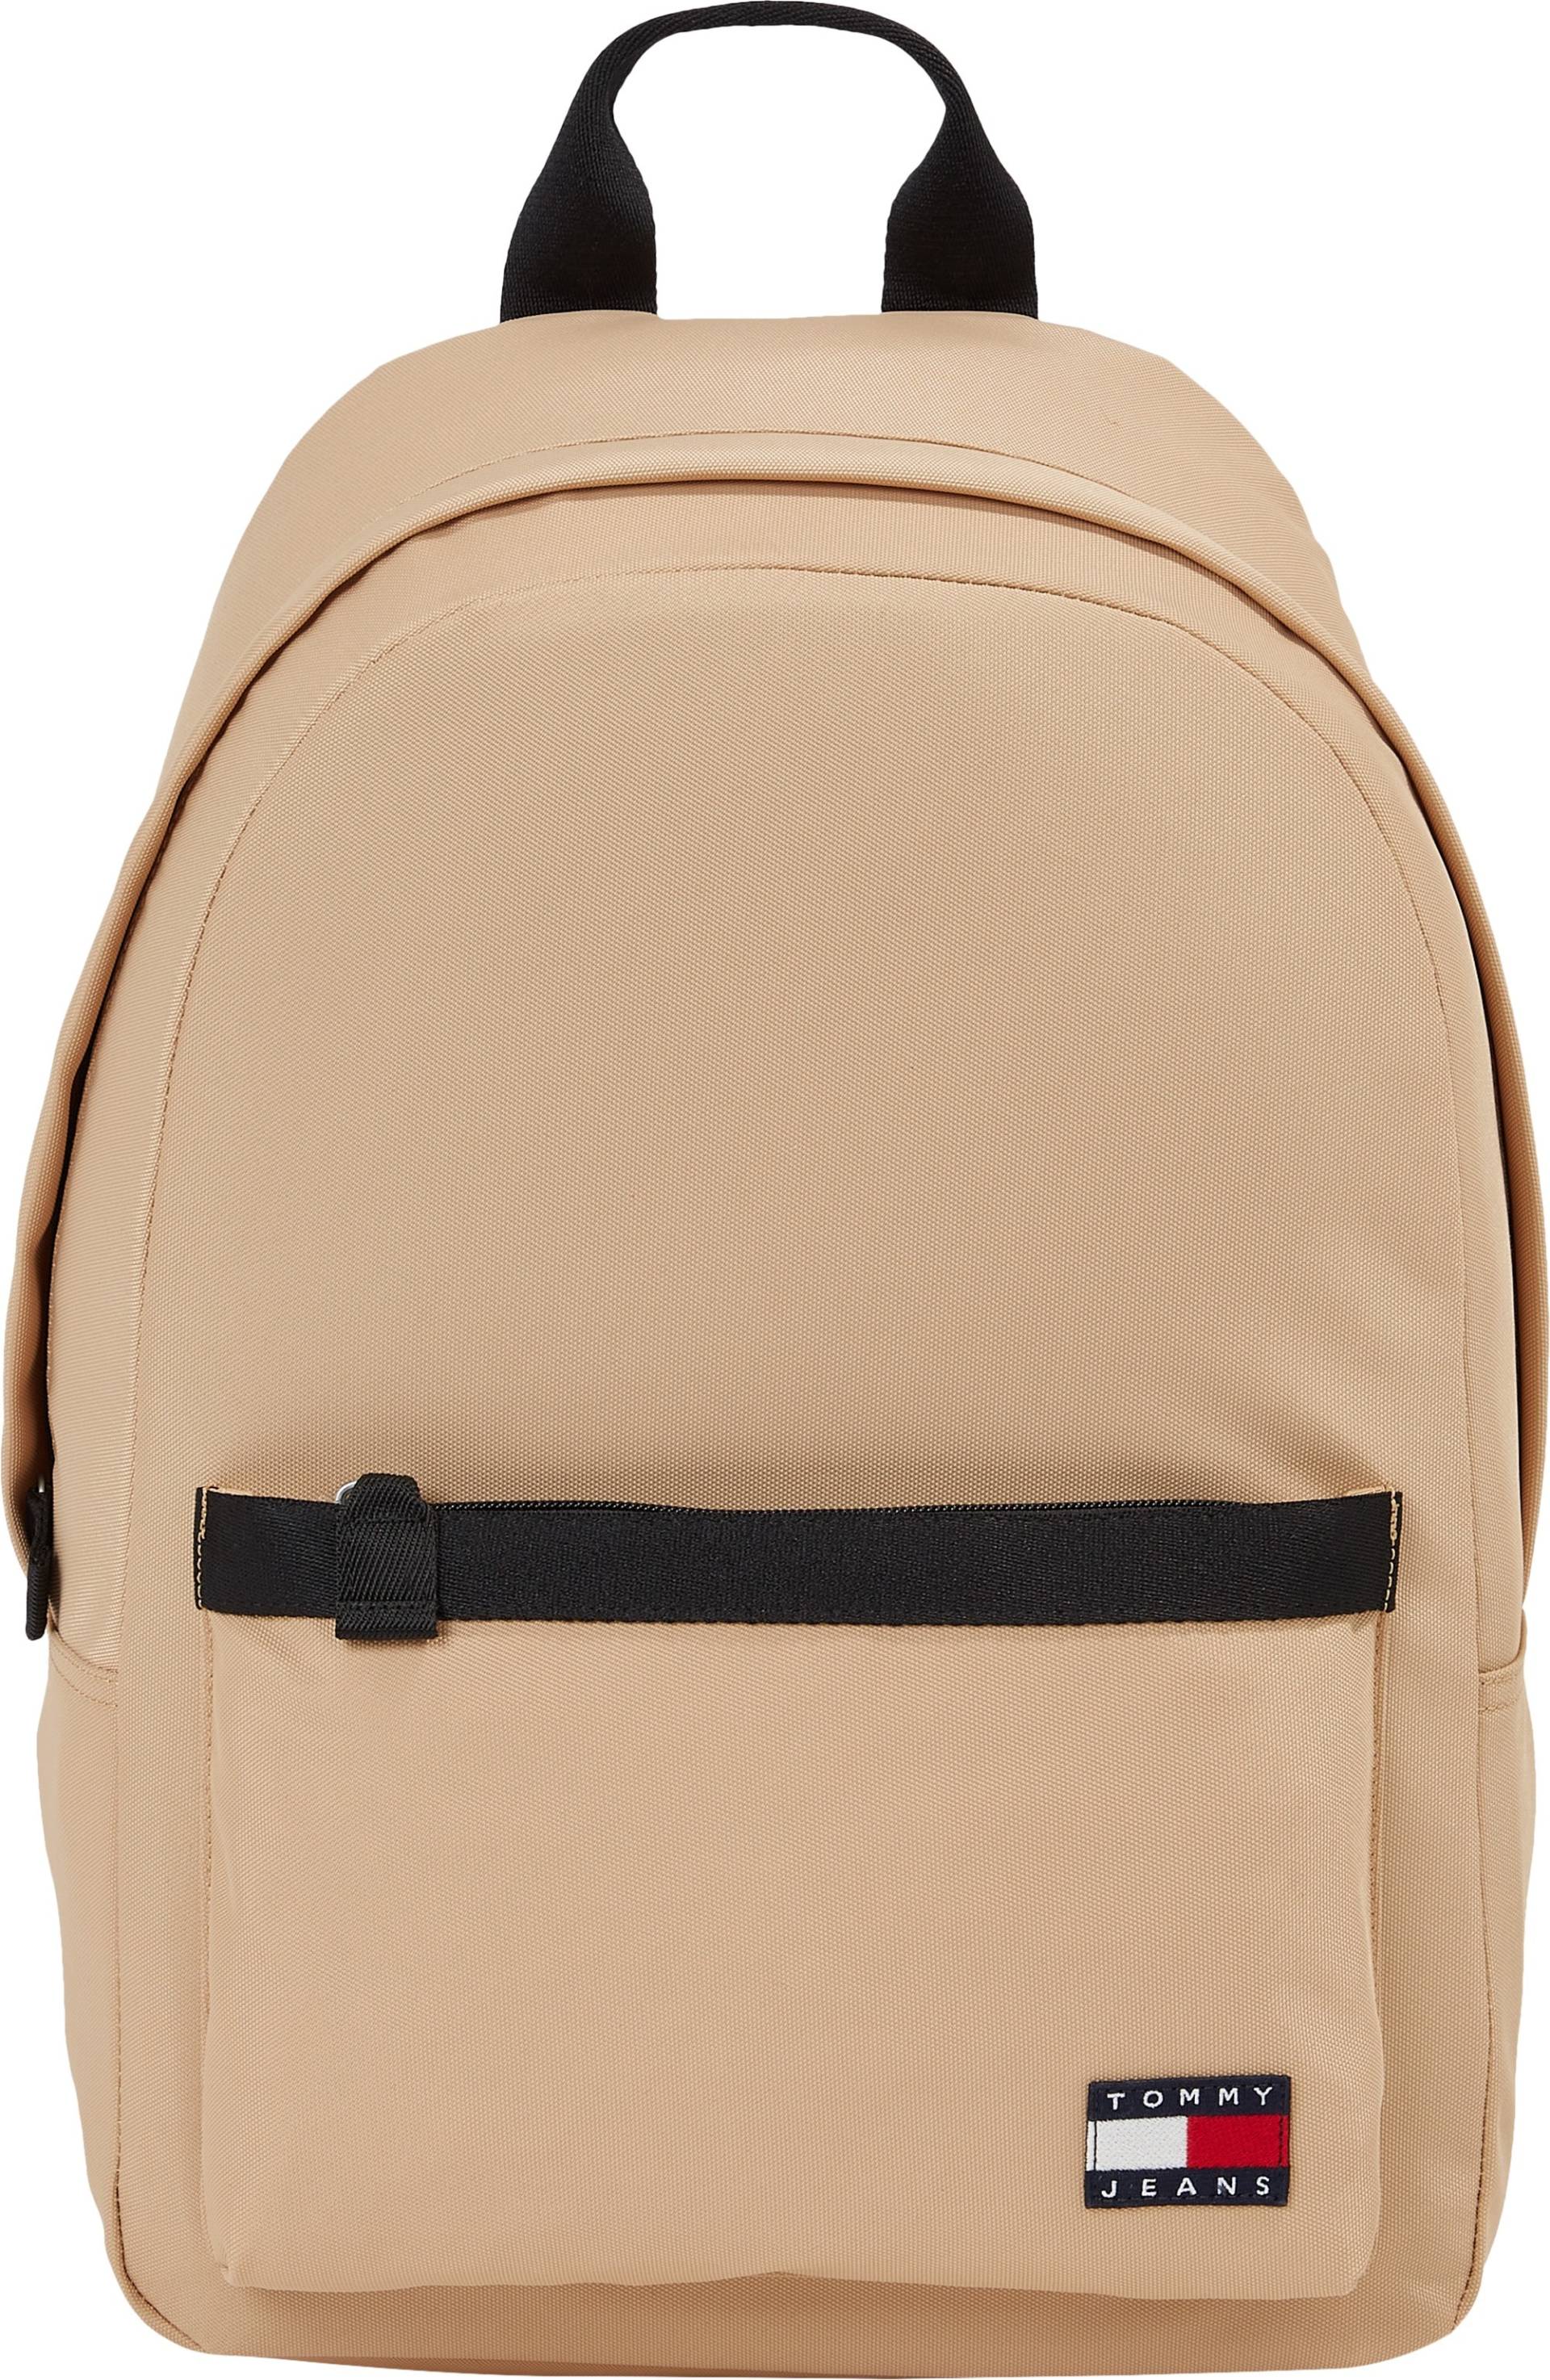 Tommy Jeans Cityrucksack »TJM DAILY DOME BACKPACK«, Freizeitrucksack Freizeit-Bag Schulrucksack Recycelte Materialien von Tommy Jeans